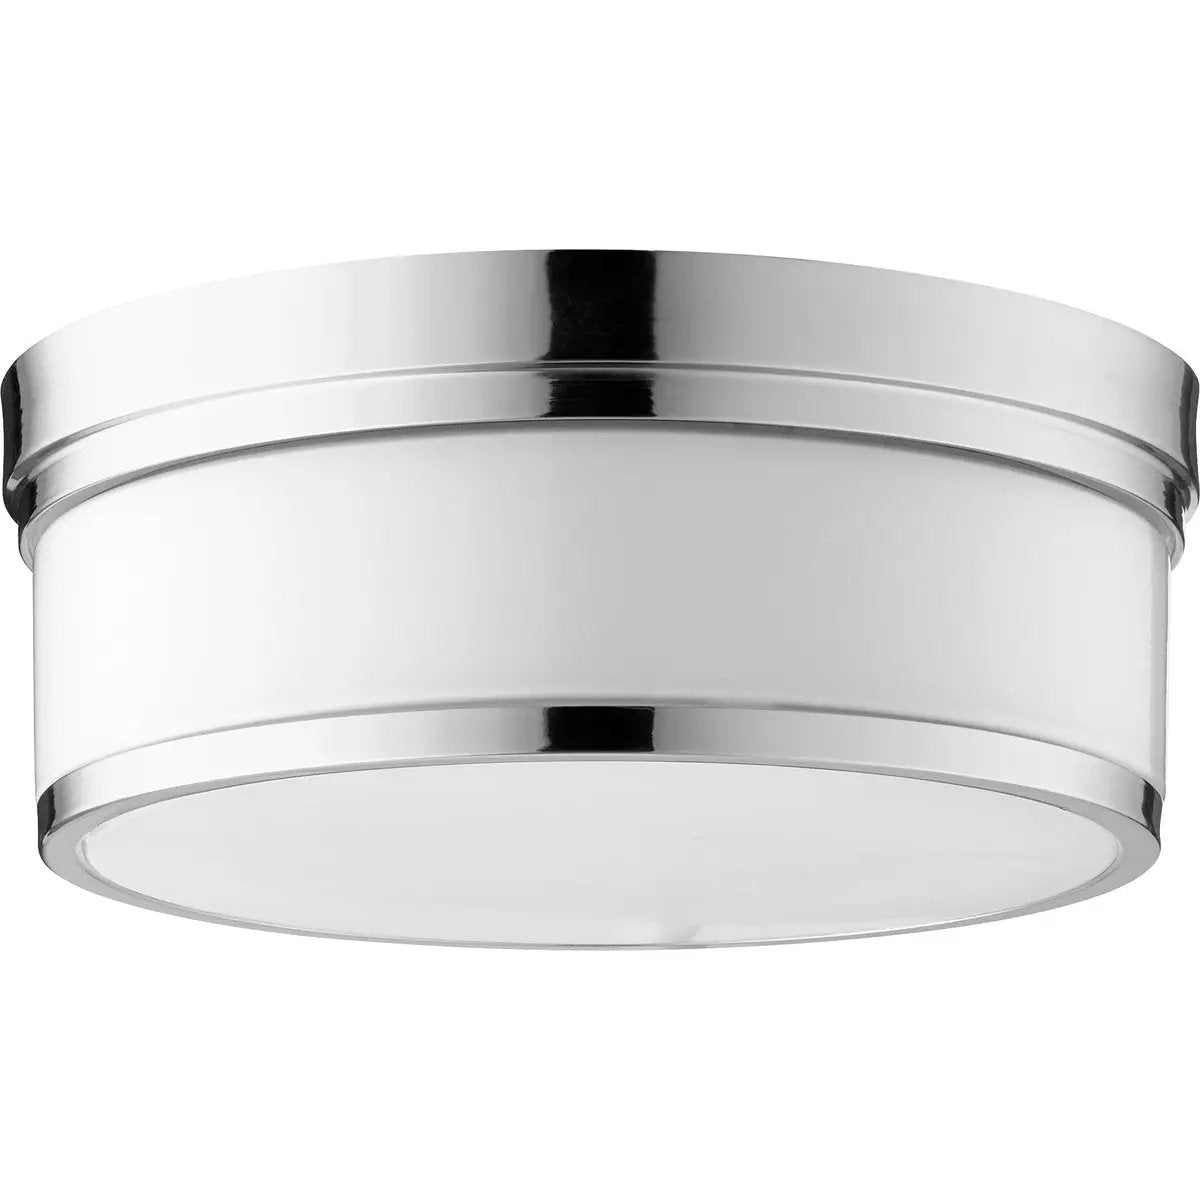 A modern flush mount light fixture with a silver circle design. Adds futuristic luxury to any space. Brand: Quorum International.